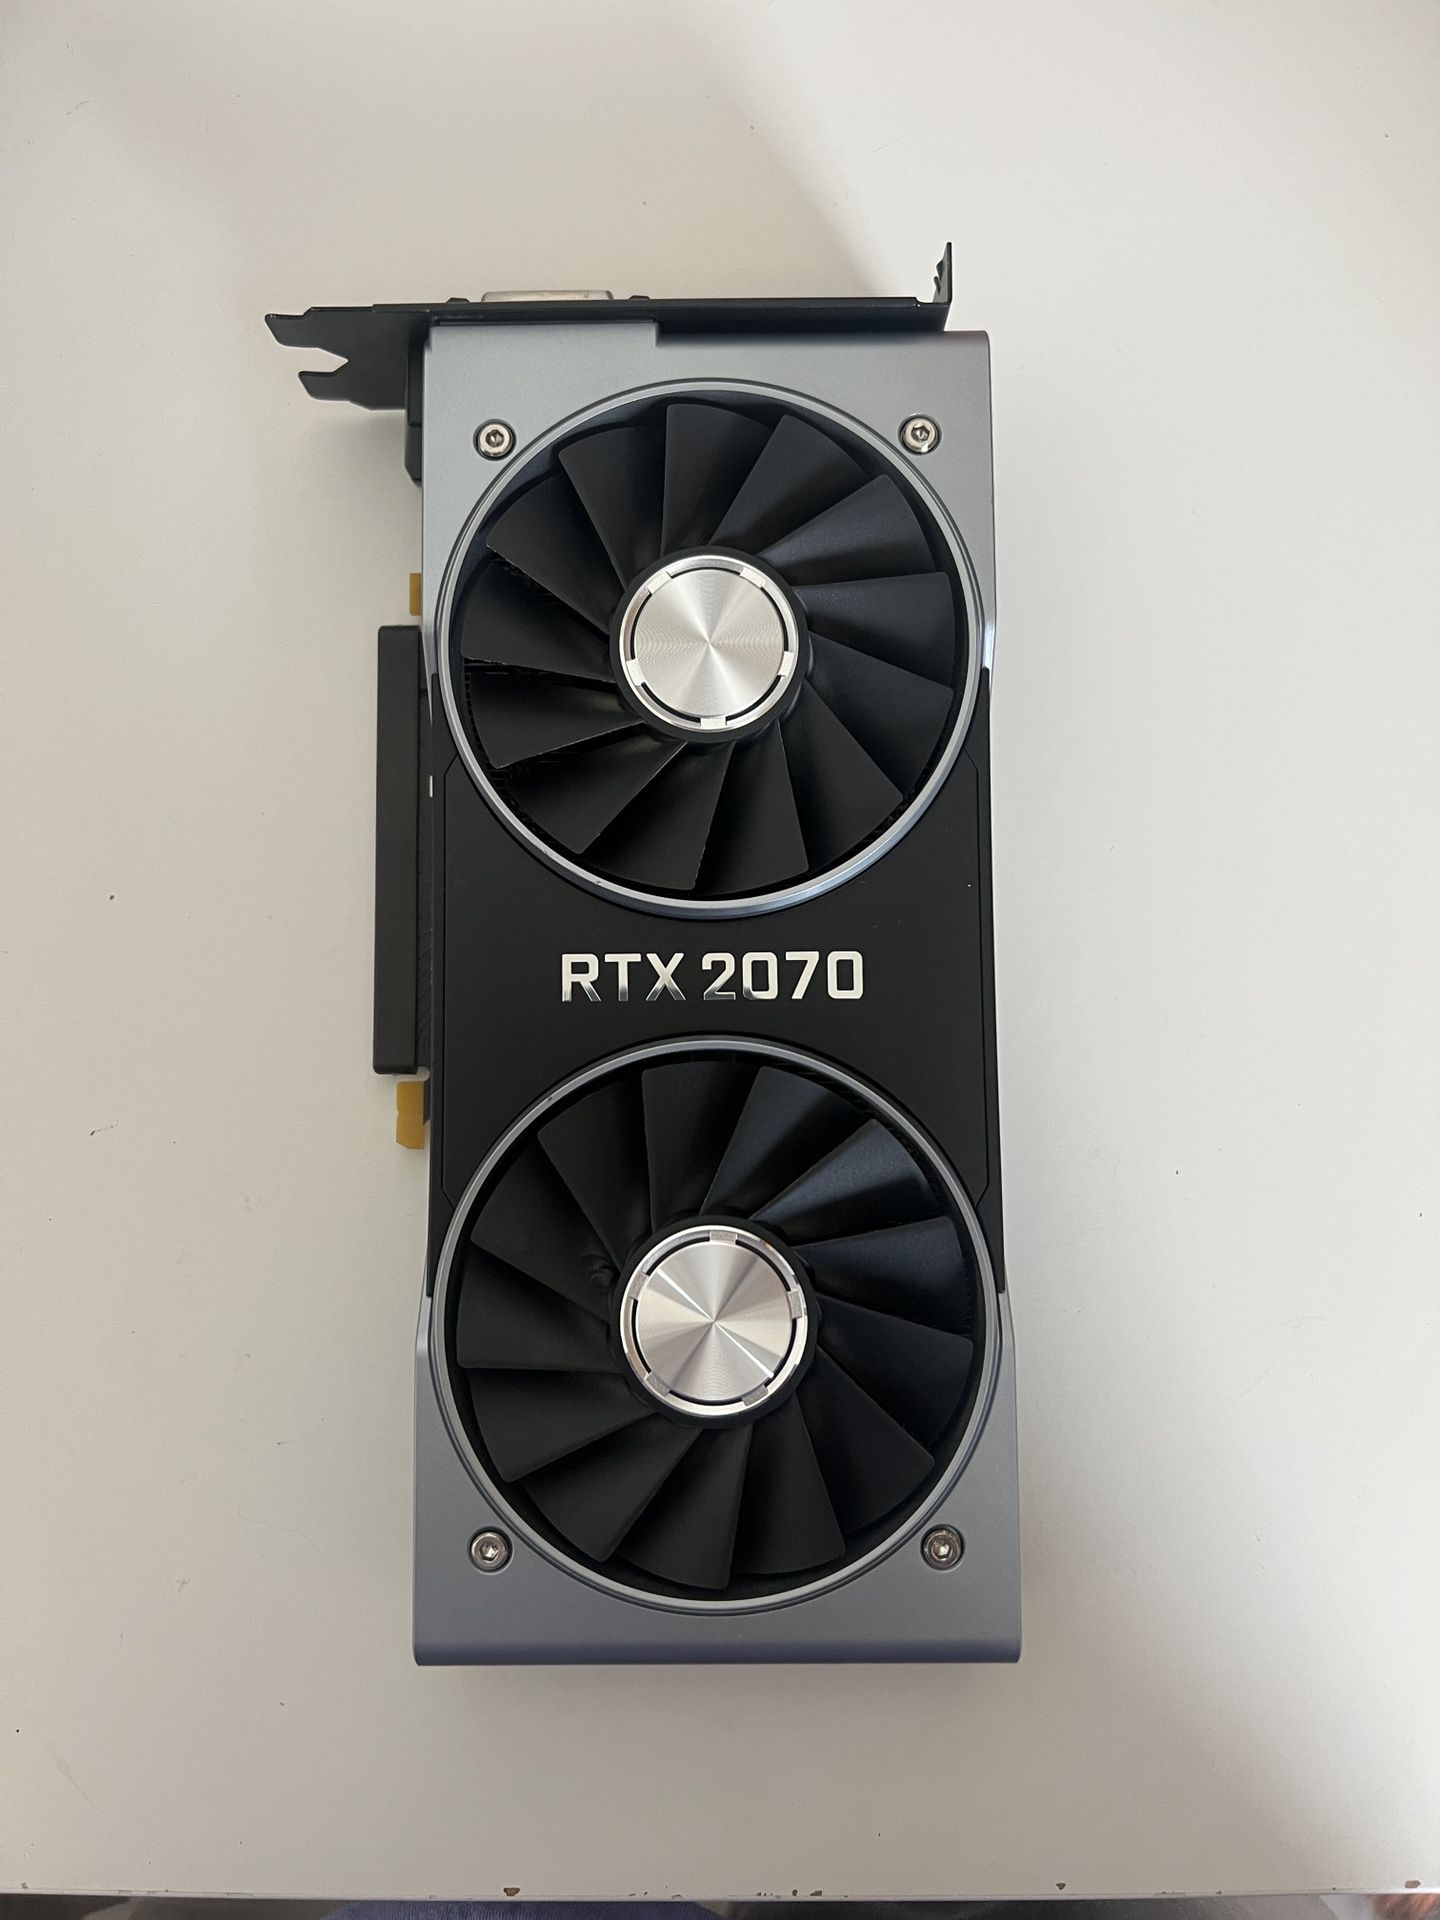 Nvidia GeForce RTX 2070 Founders Edition 8G